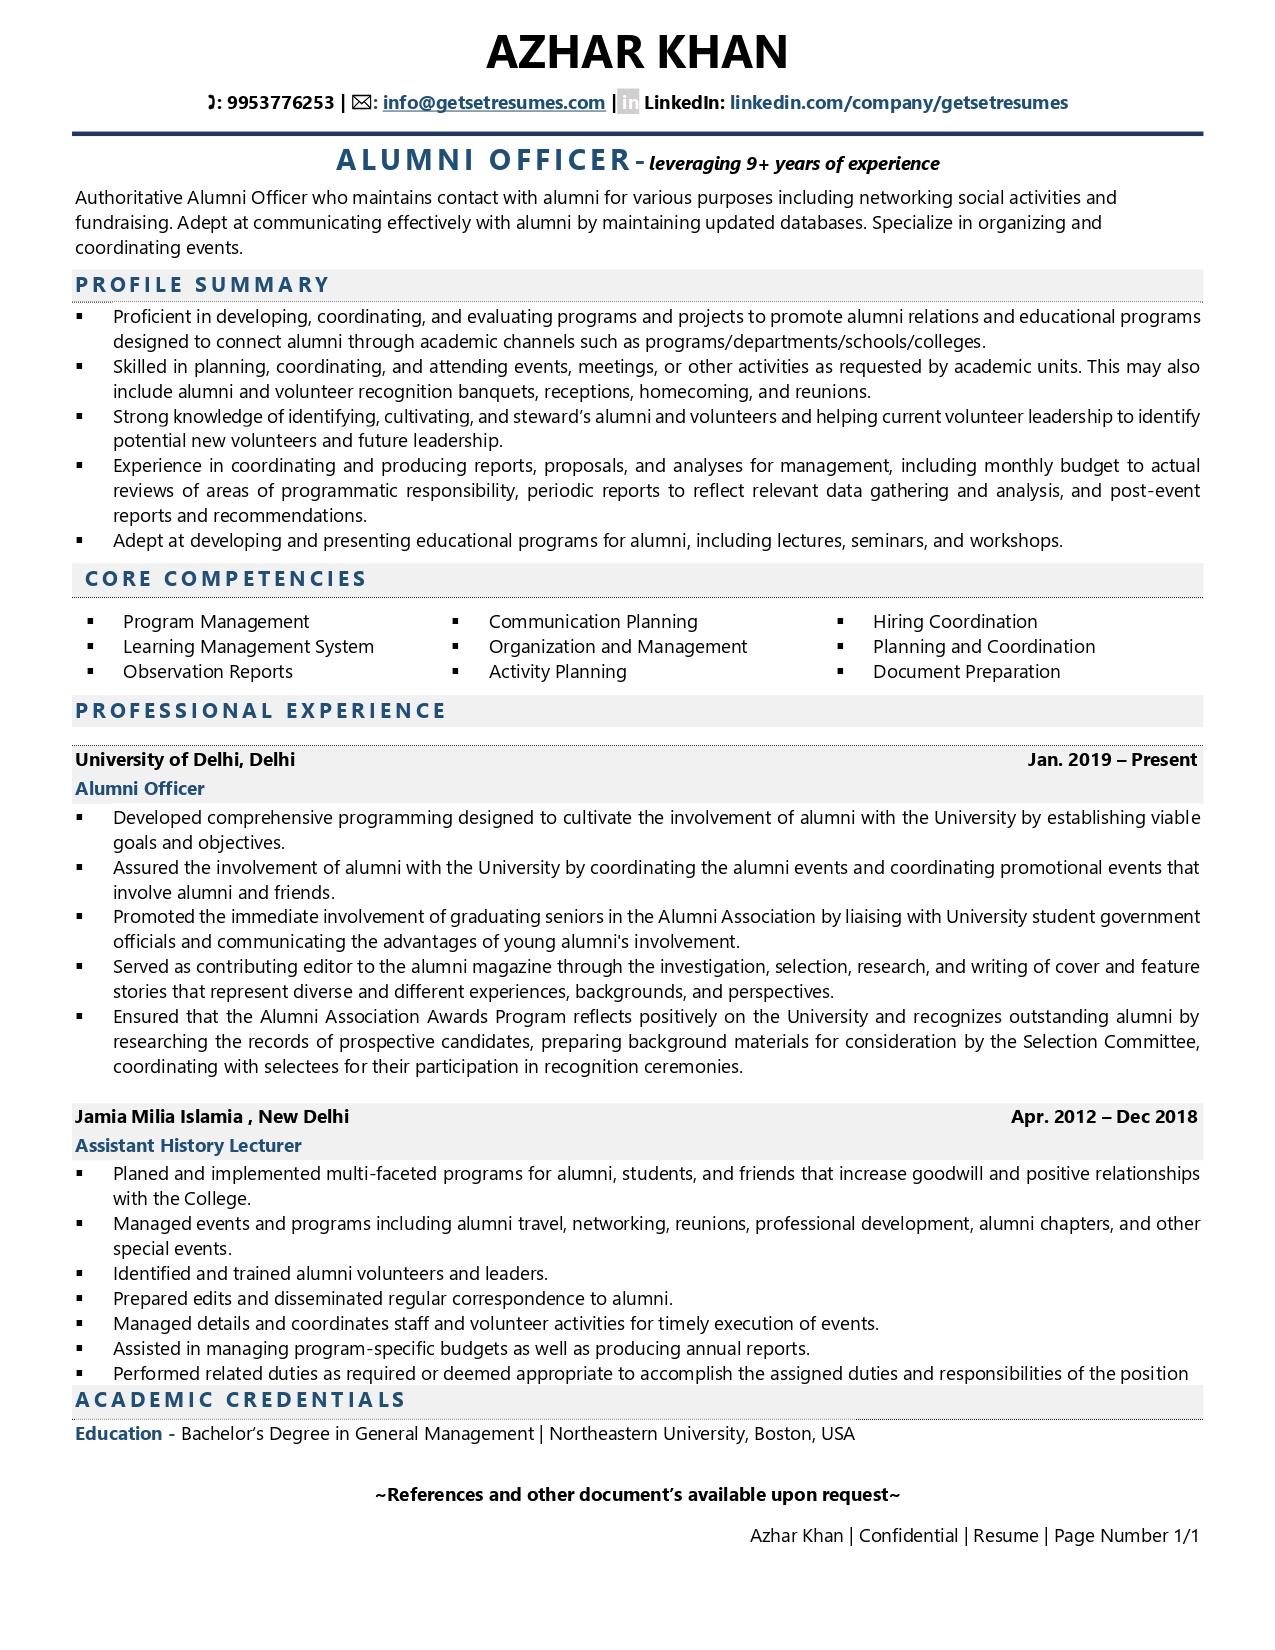 Alumni Officer - Resume Example & Template